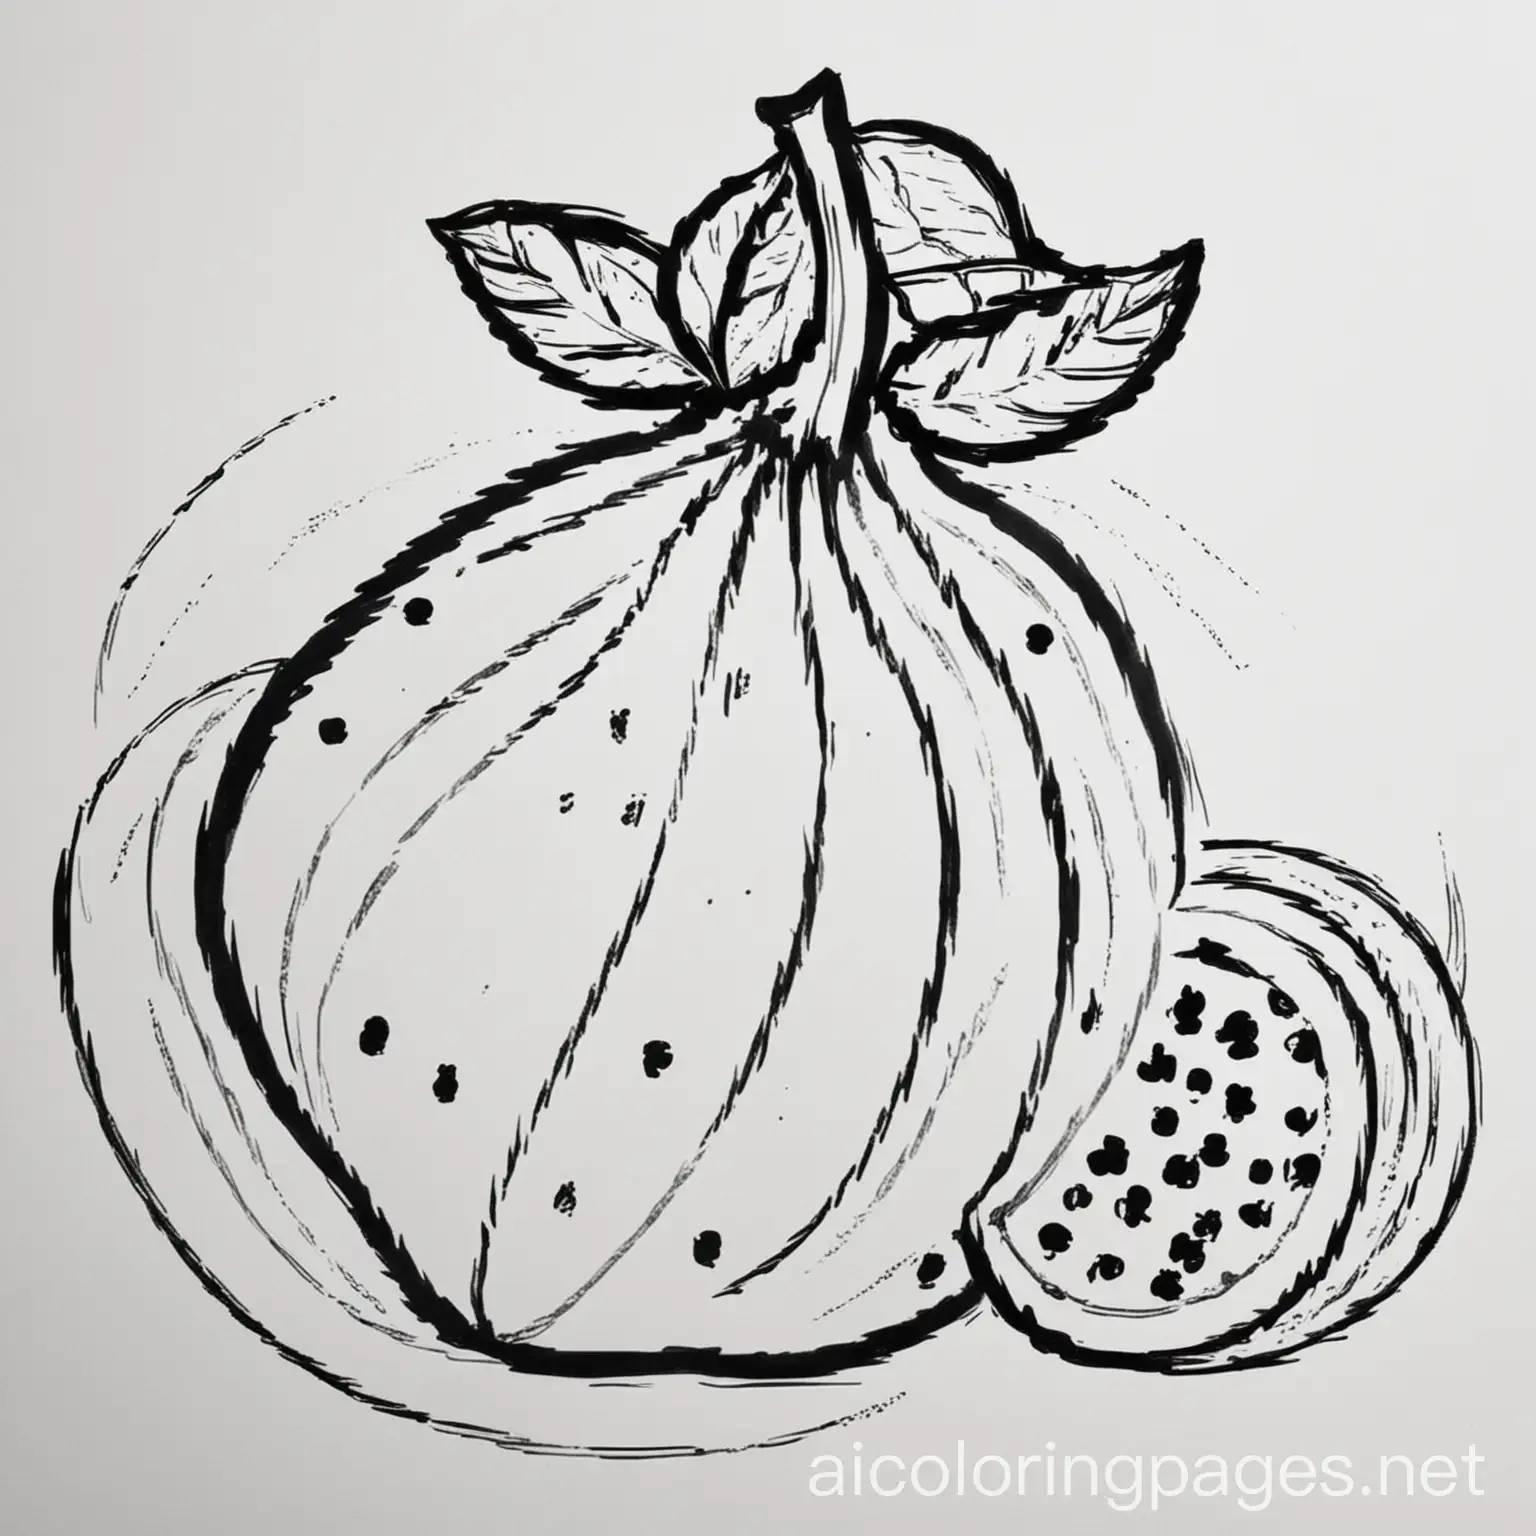 fruit coloring book, Coloring Page, black and white, line art, white background, Simplicity, Ample White Space. The background of the coloring page is plain white to make it easy for young children to color within the lines. The outlines of all the subjects are easy to distinguish, making it simple for kids to color without too much difficulty